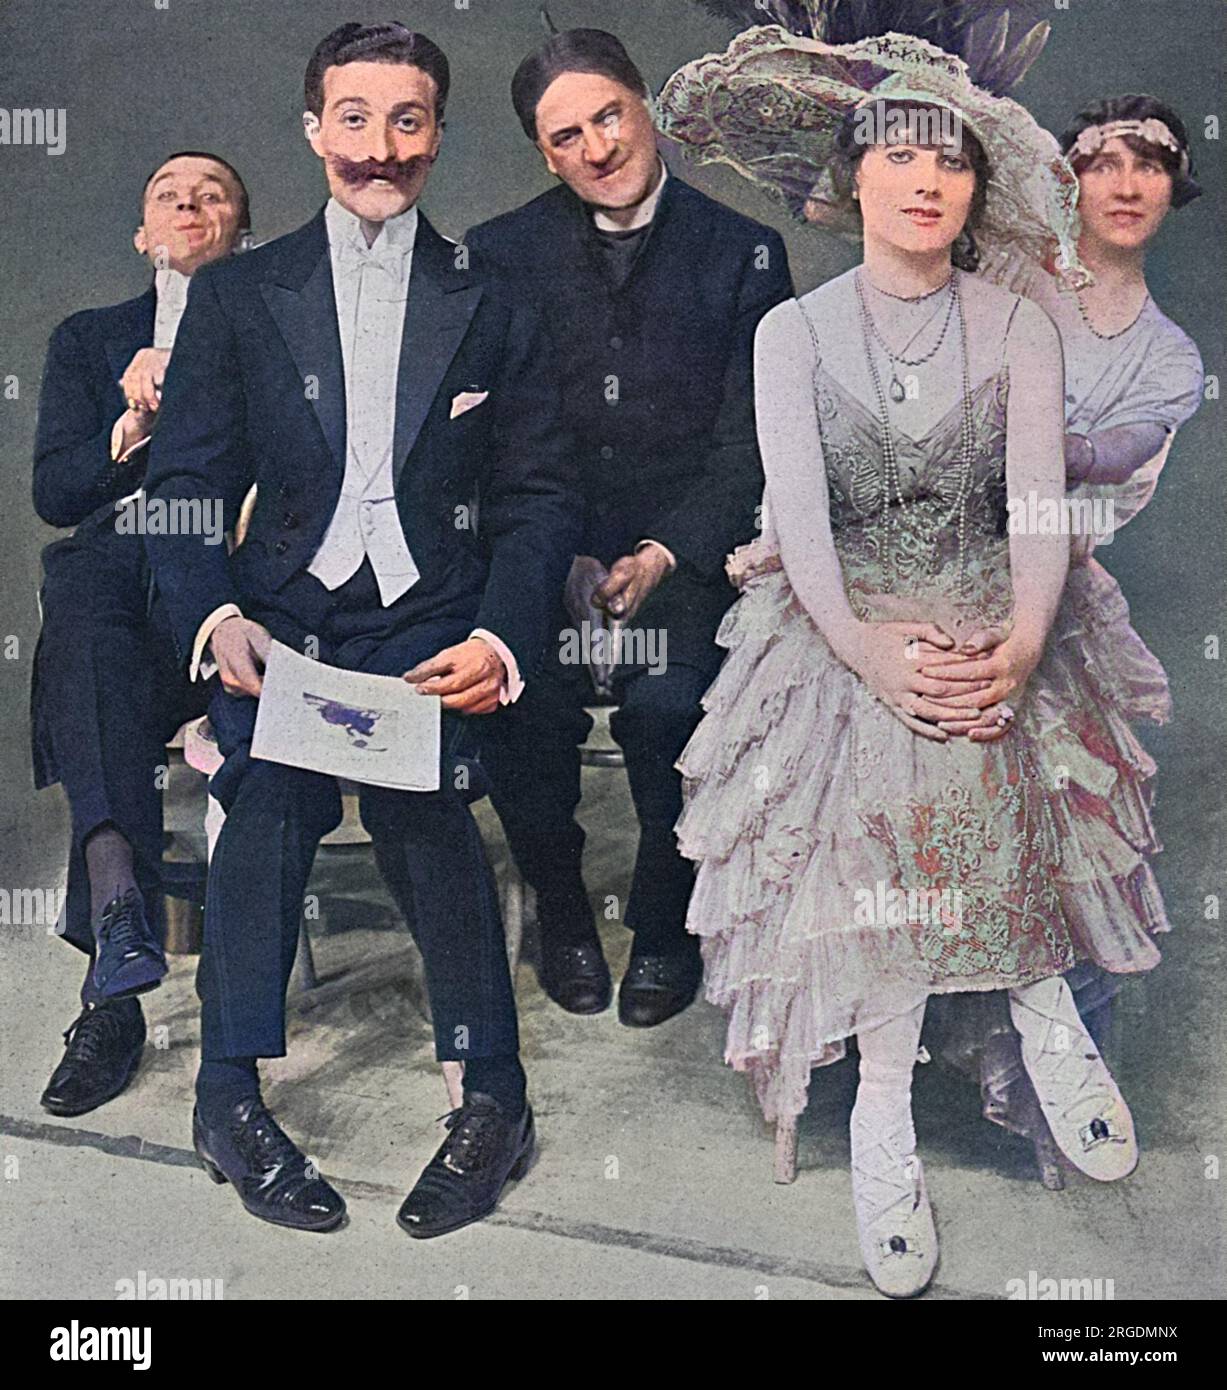 Mr Nelson Keys, Mr Arthur Playfair, Miss Gwendoline Brogden (back row from left) and Mr Simon-Girard and Miss Gina Palerme, all appearing in 'Bric-A-Brac', a new revue at the Palace Theatre, London in 1915. Stock Photo